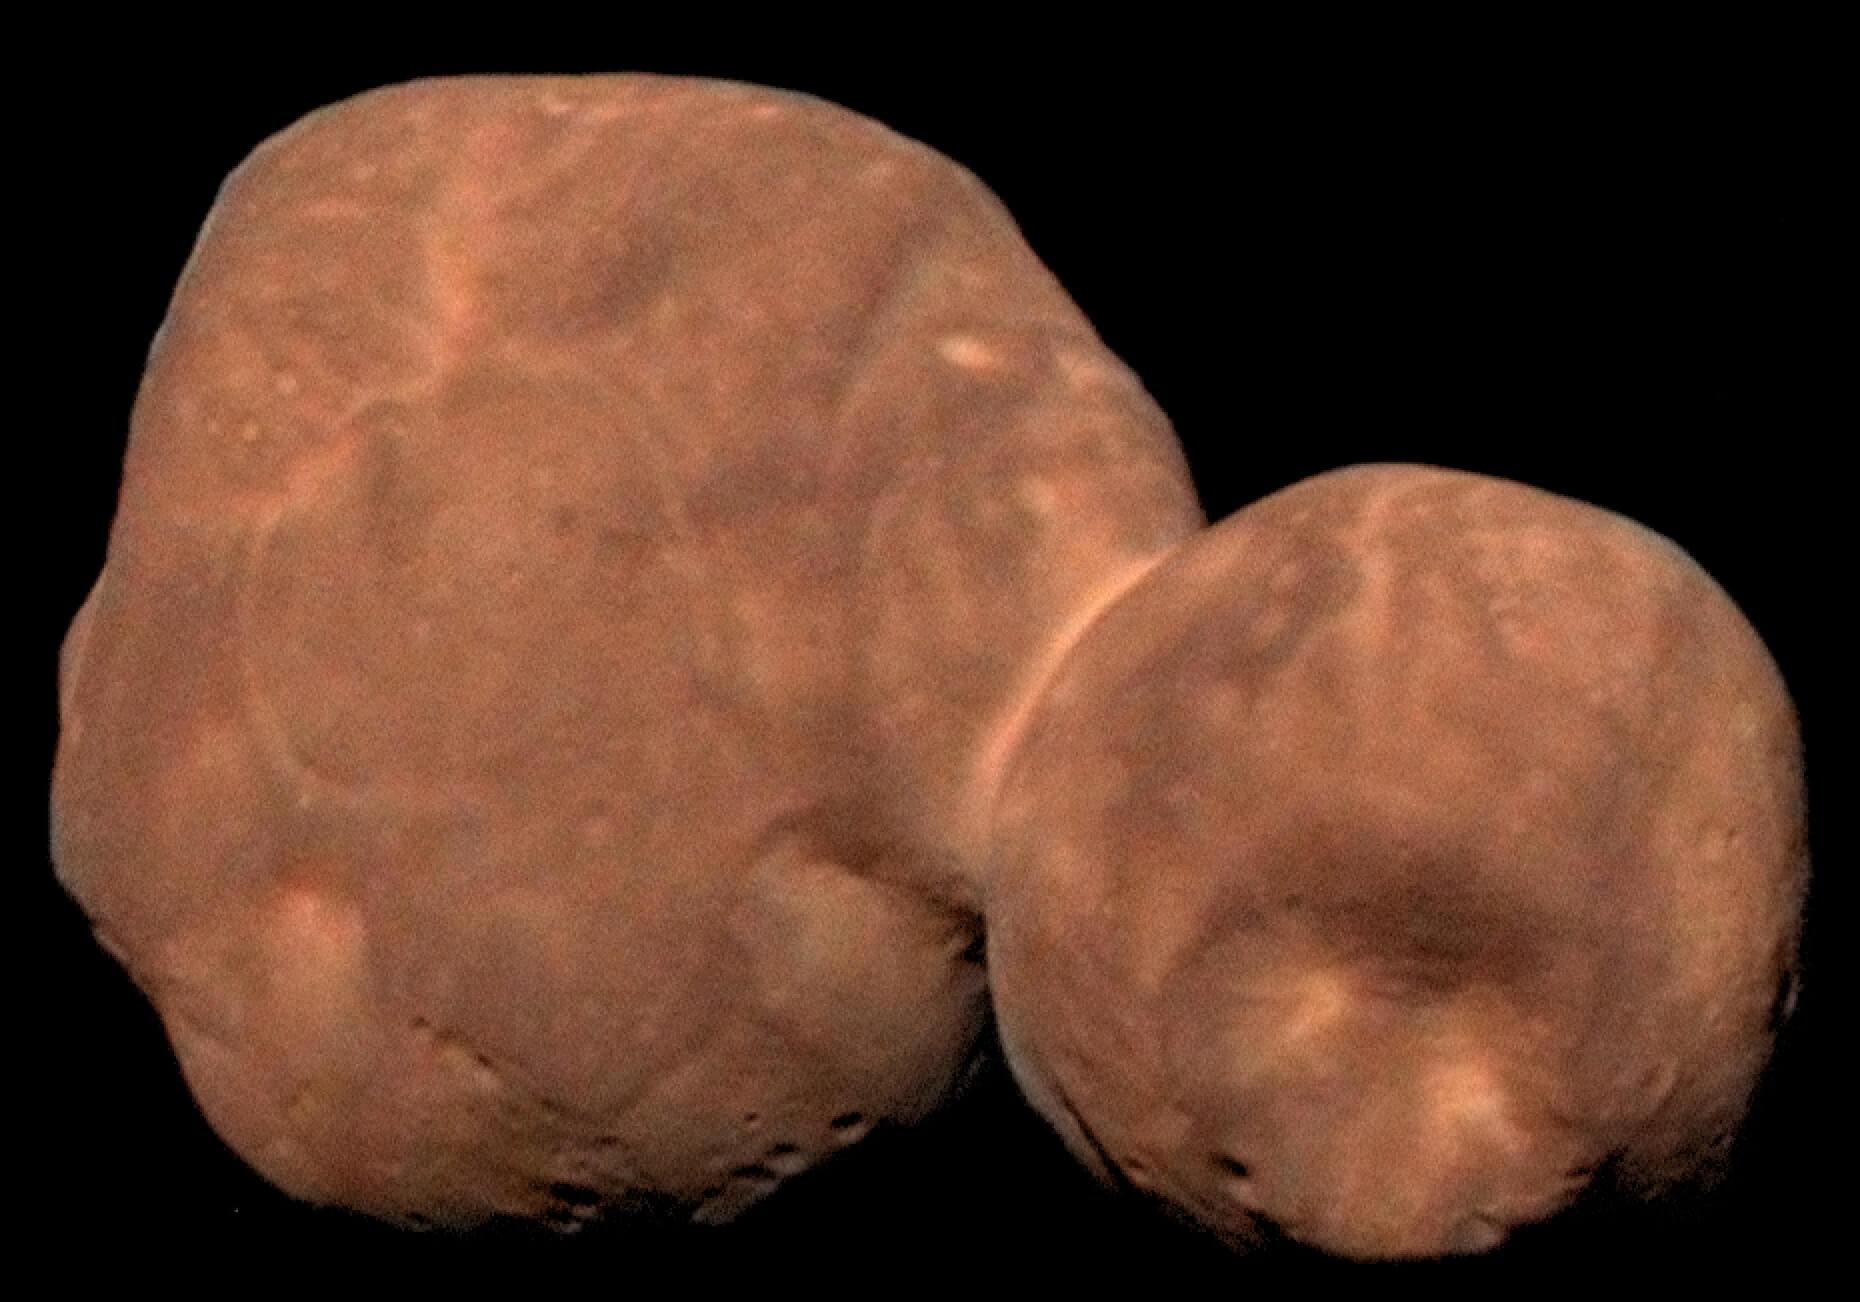 New Horizons has received new information about the formation of planets